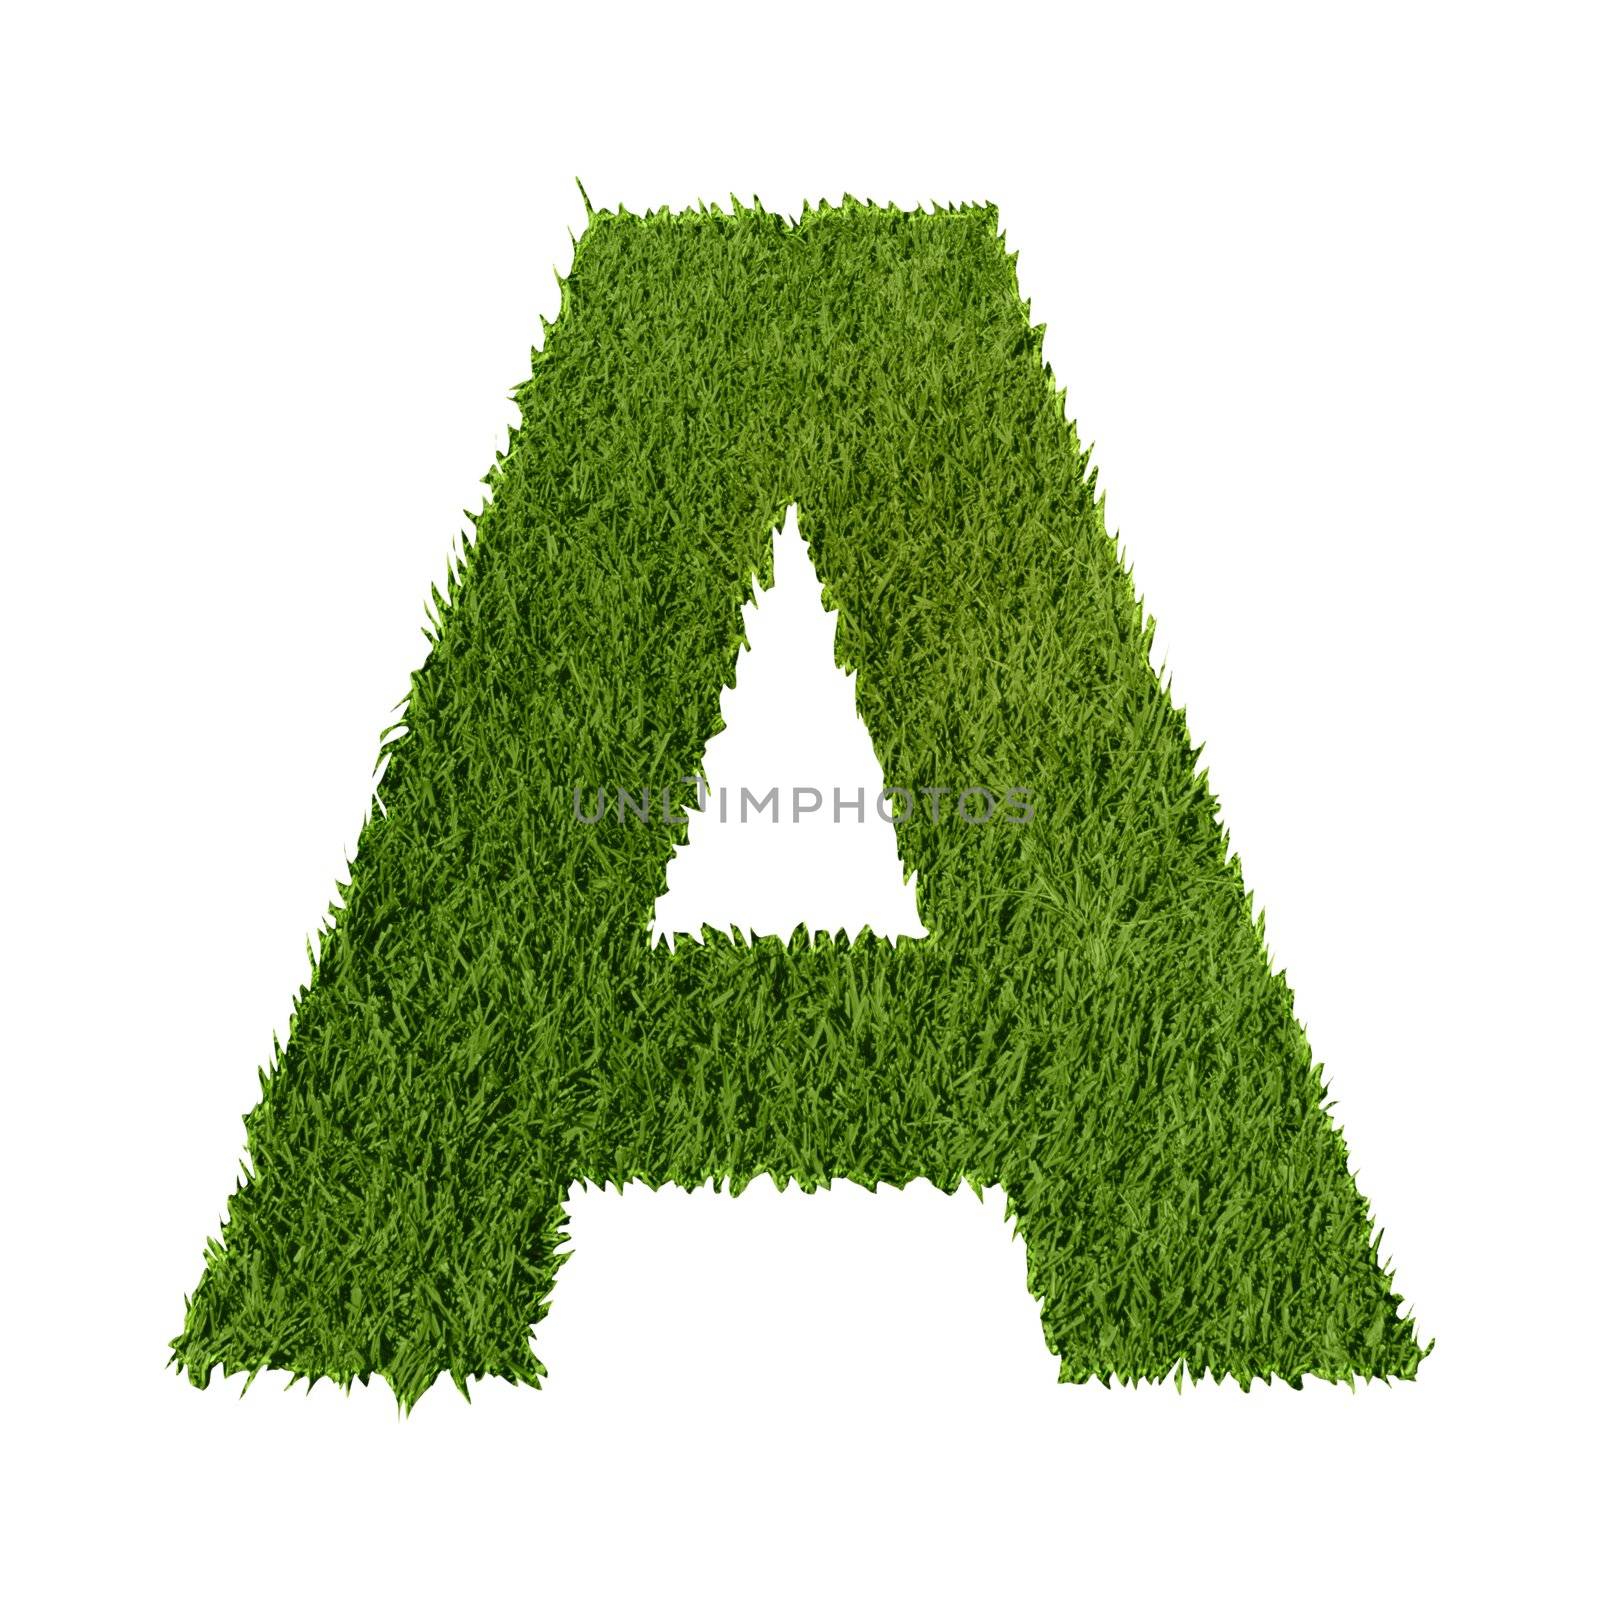 Green grass letter A on white background